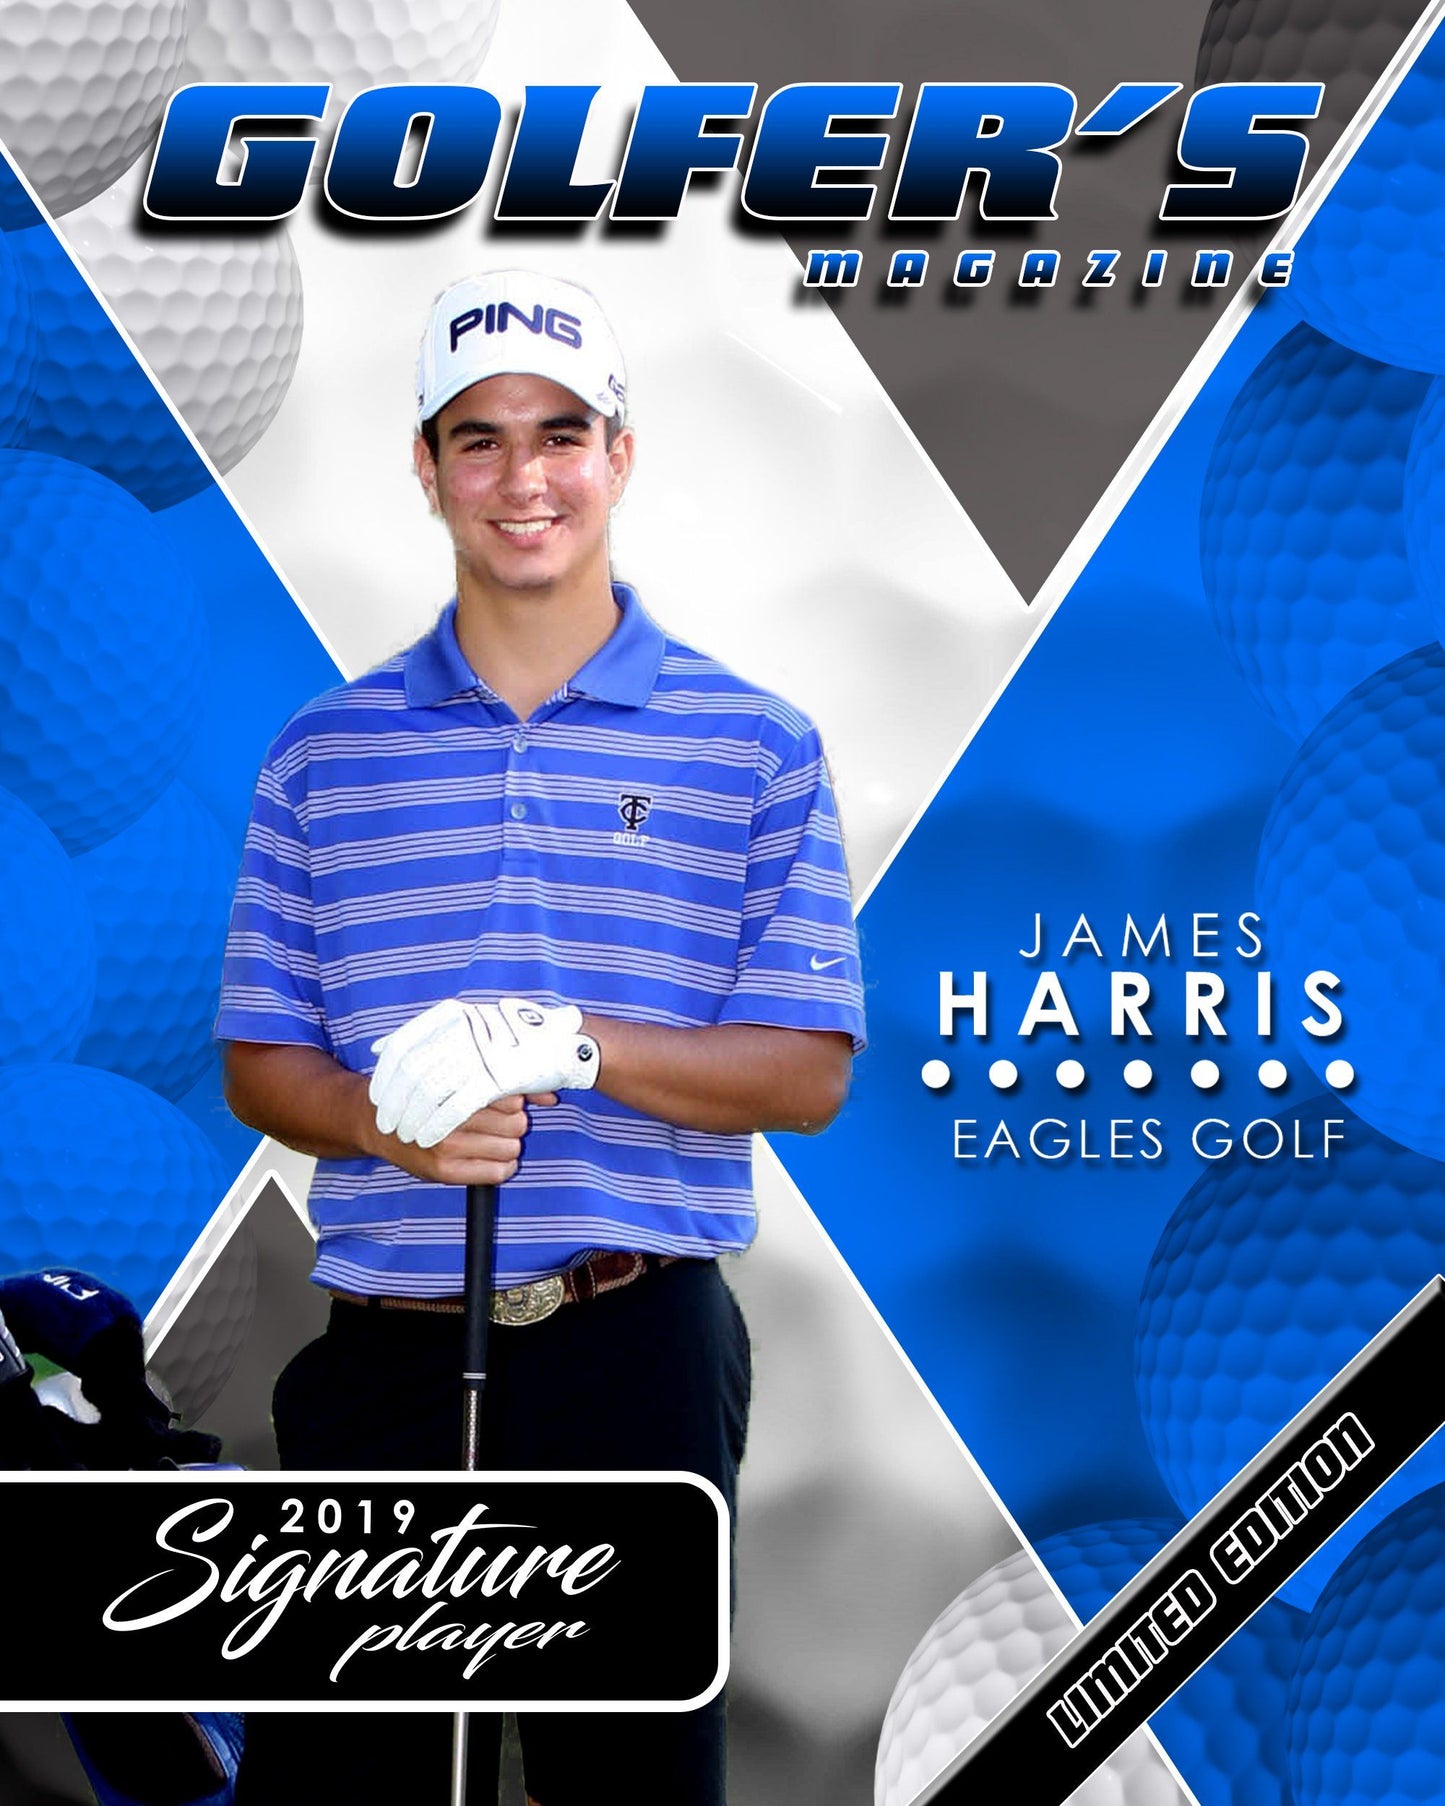 Signature Player - Golf - V2 - Extraction Magazine Cover Template-Photoshop Template - Photo Solutions